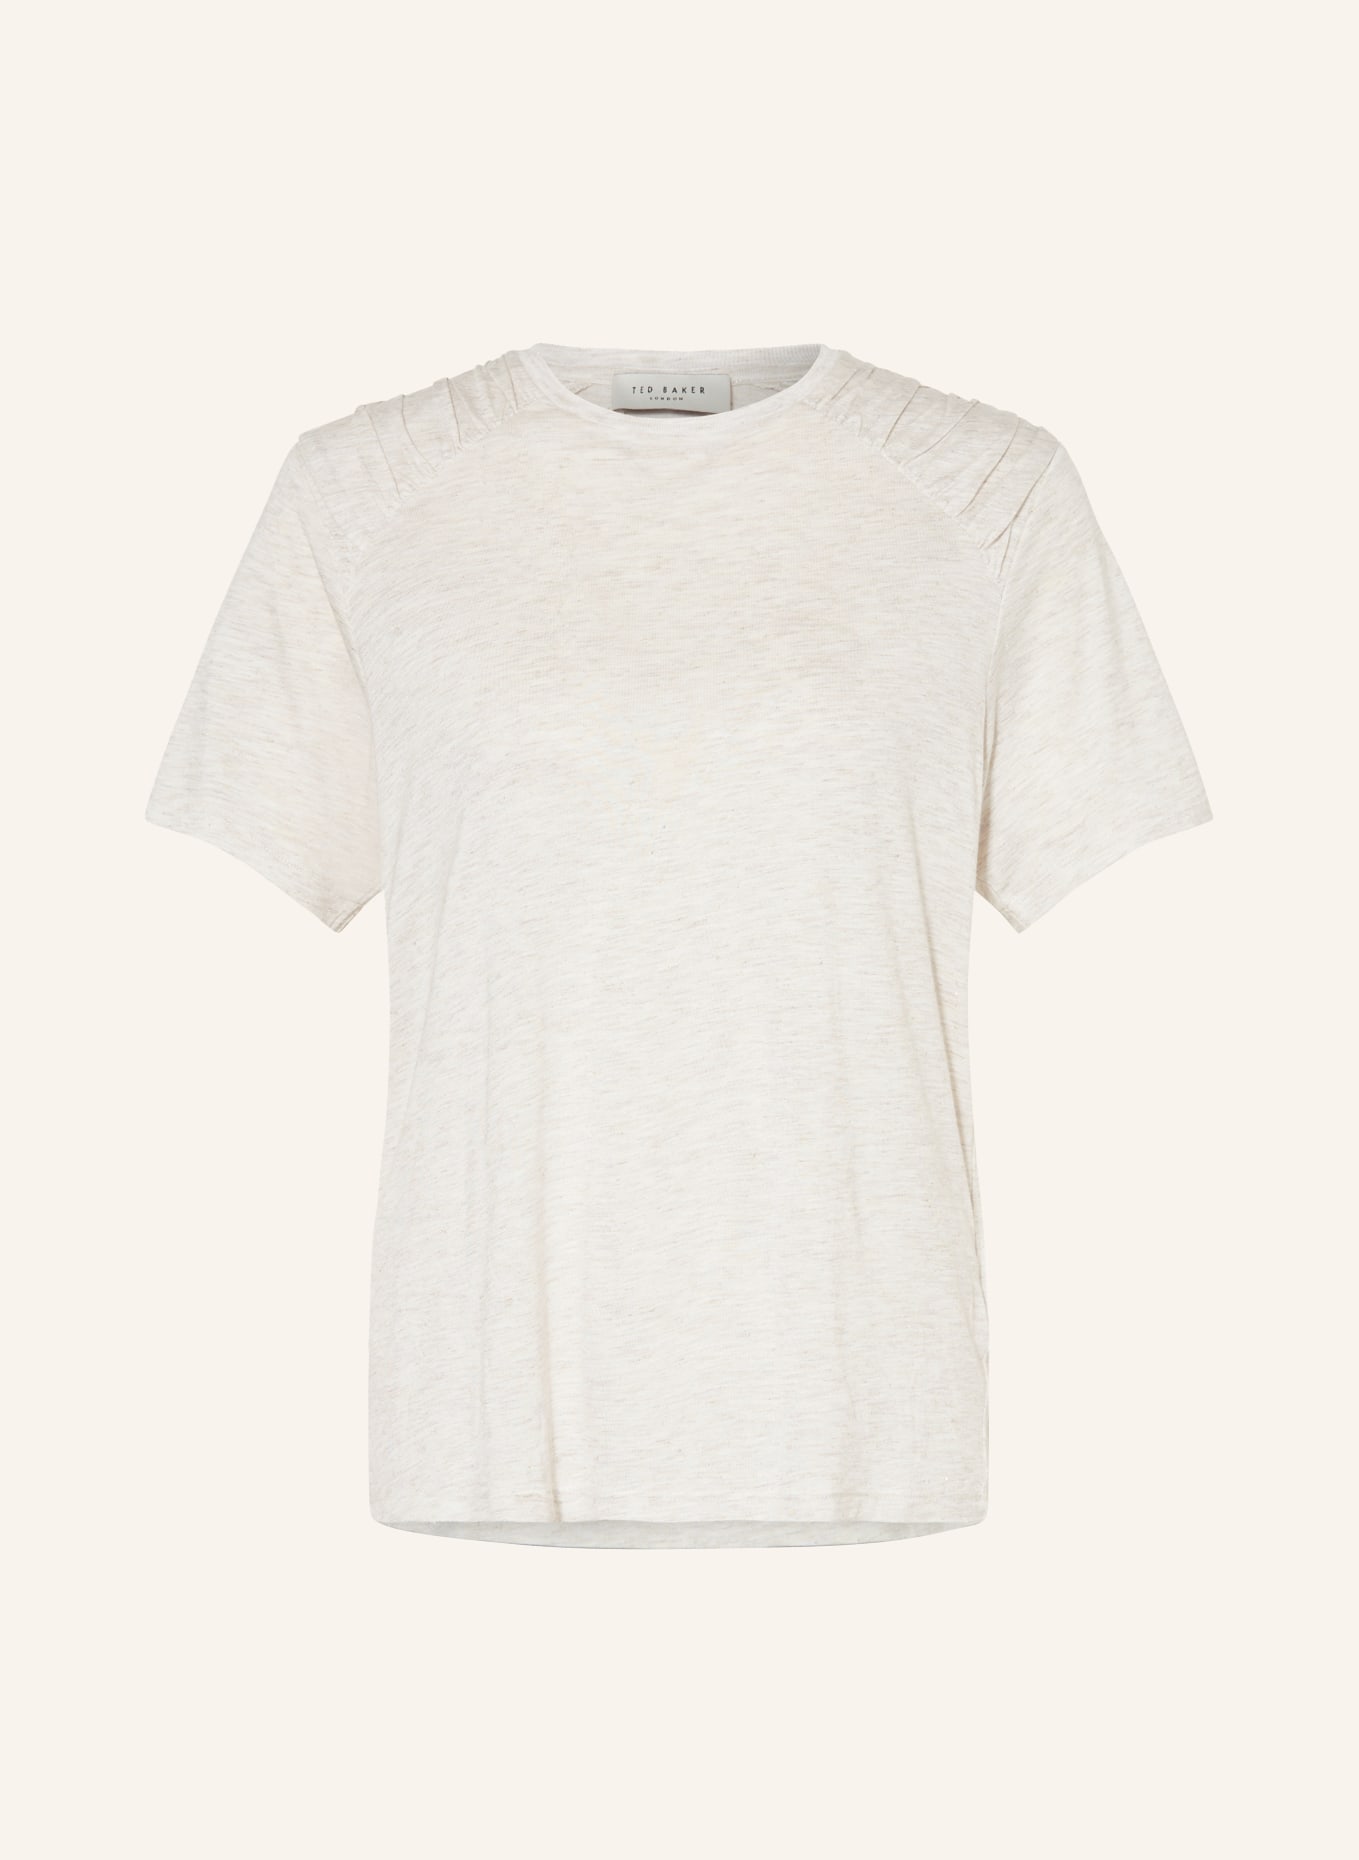 TED BAKER T-shirt DAWNAAA with glitter thread, Color: LIGHT GRAY/ GOLD (Image 1)